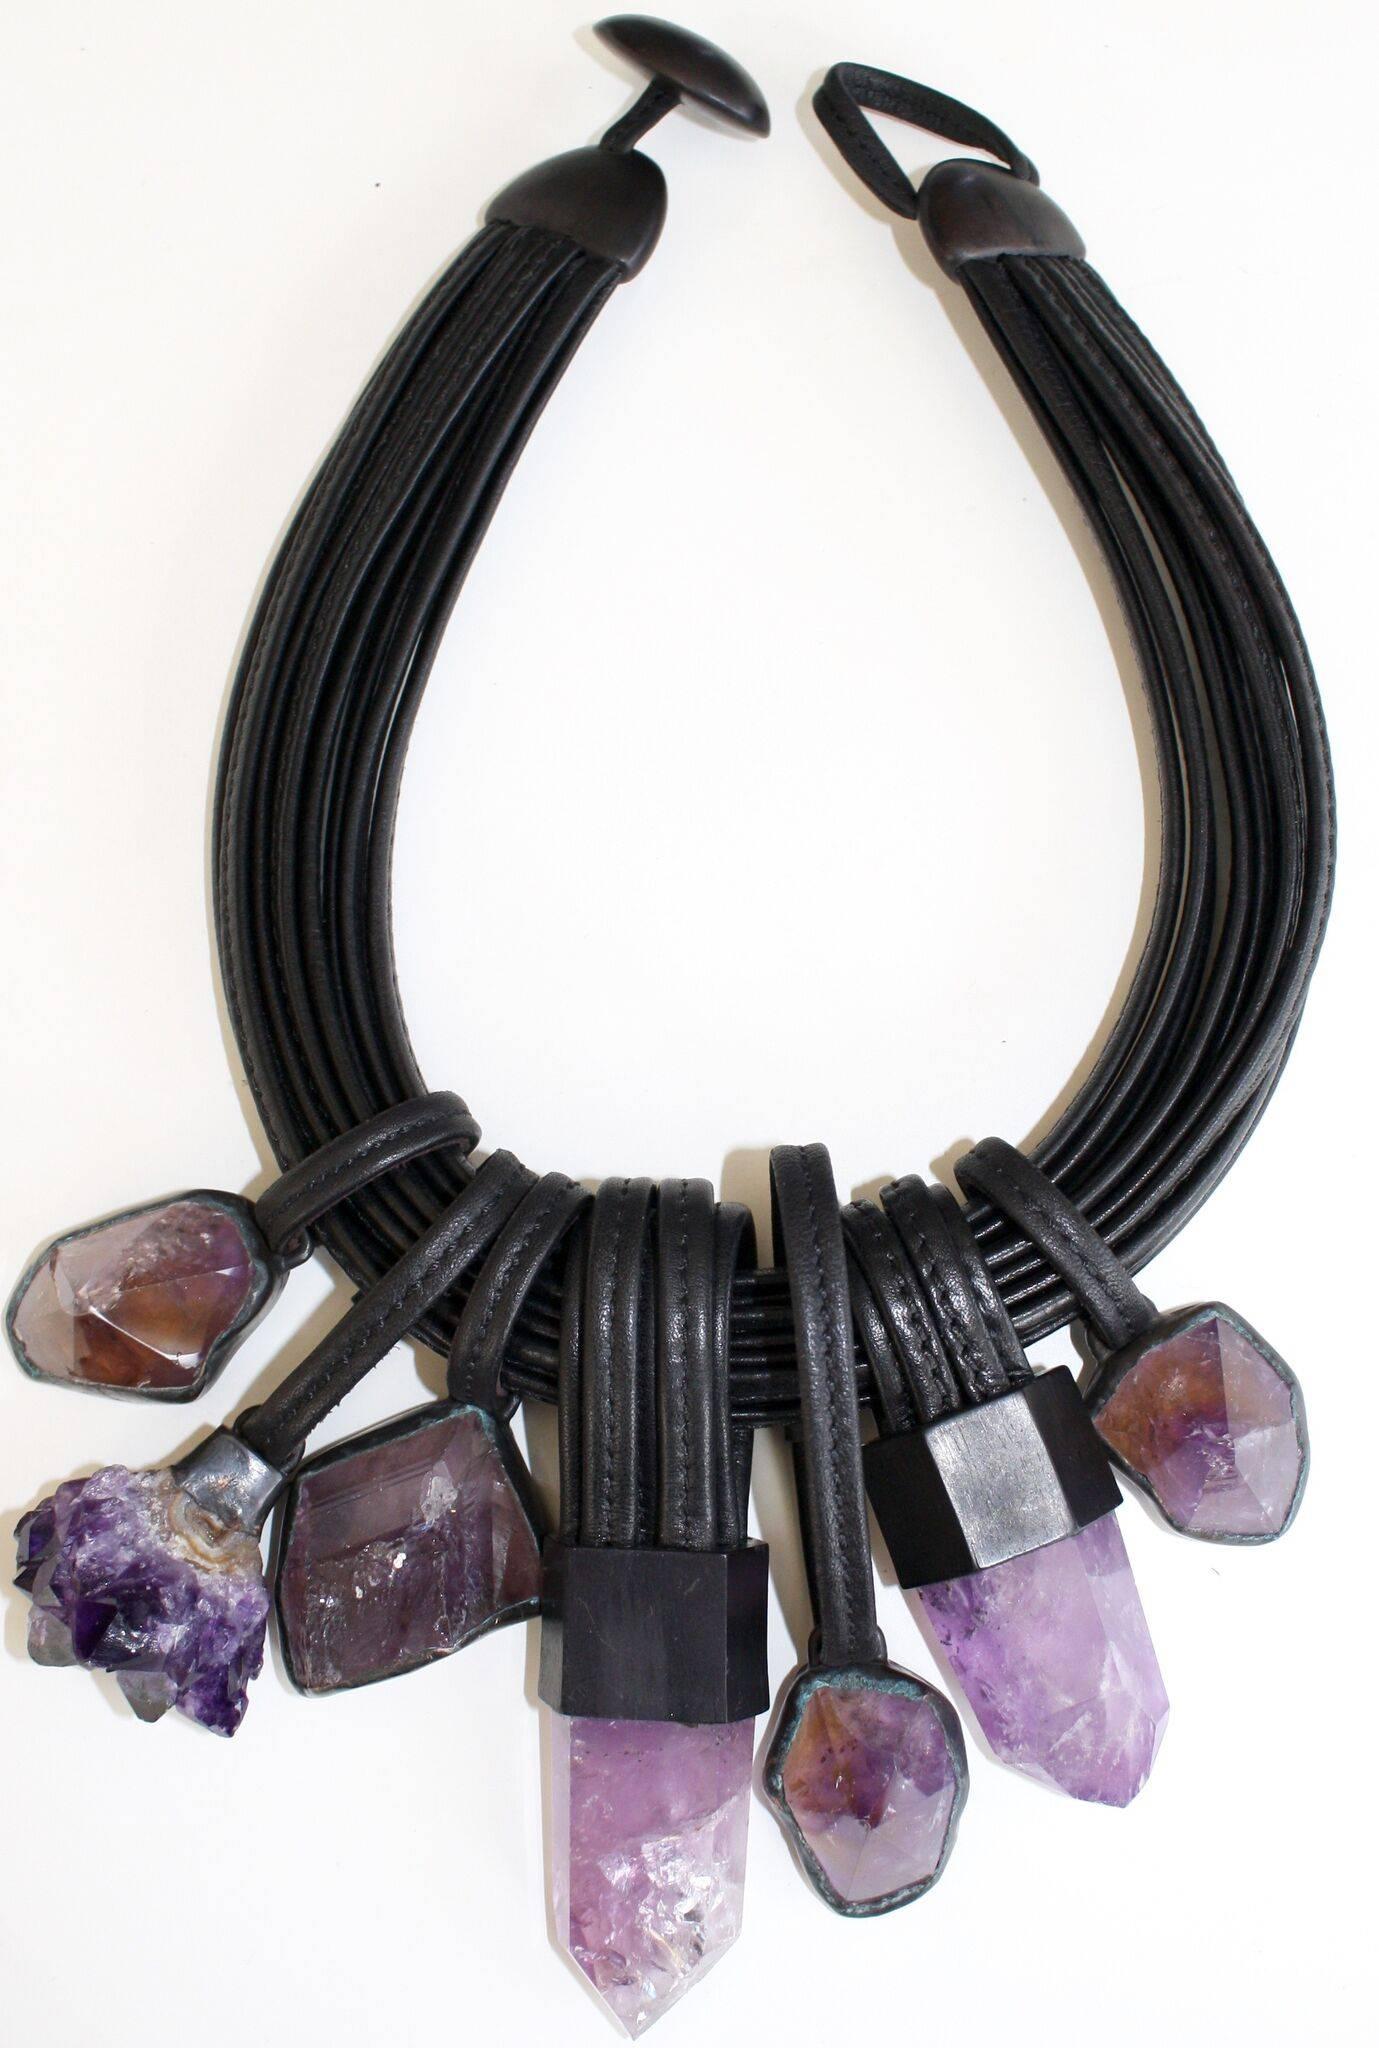 One of a kind statement necklace made with multiple strands of leather and amethyst drops from Monies.

17